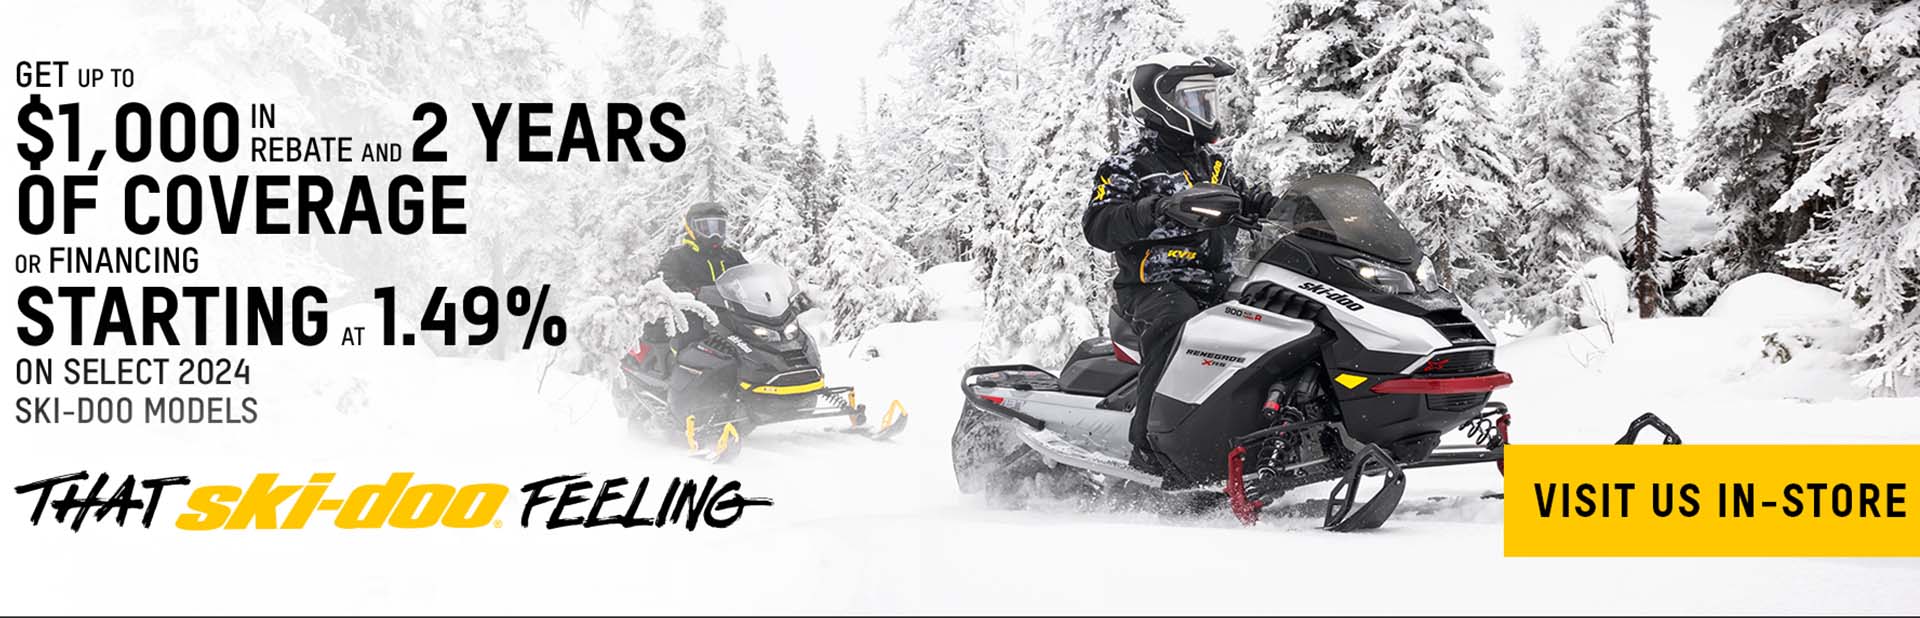 Get rebates up to $1,000 and 2 years of coverage or financing starting at 1.49% on select 2024 Ski-Doo models